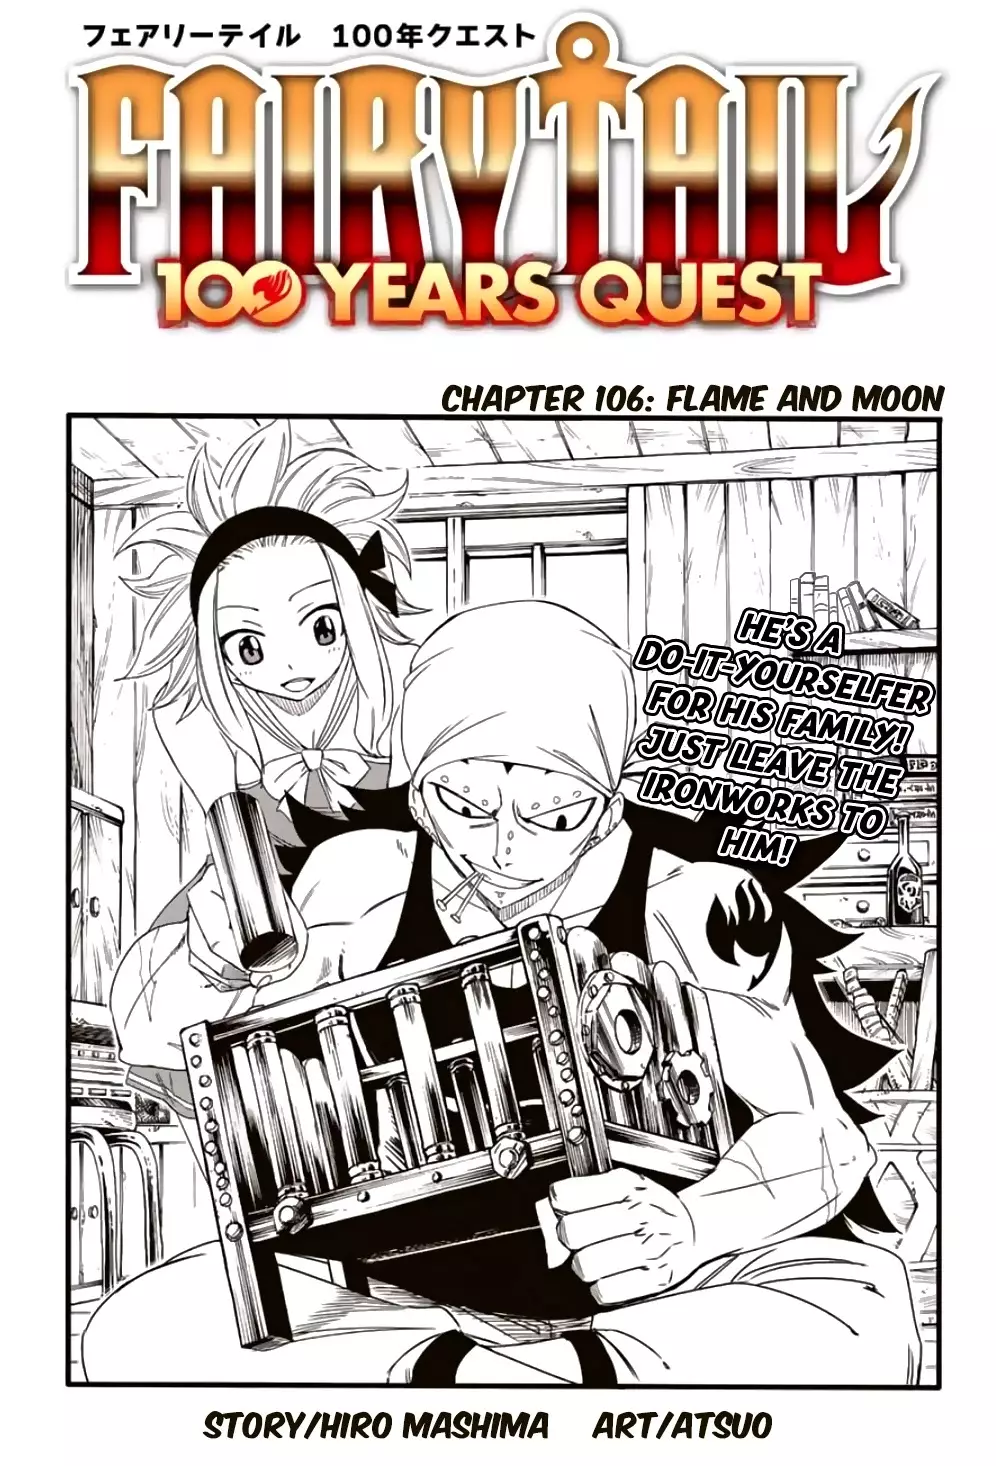 Fairy Tail: 100 Years Quest - 106 page 1-84bd0875